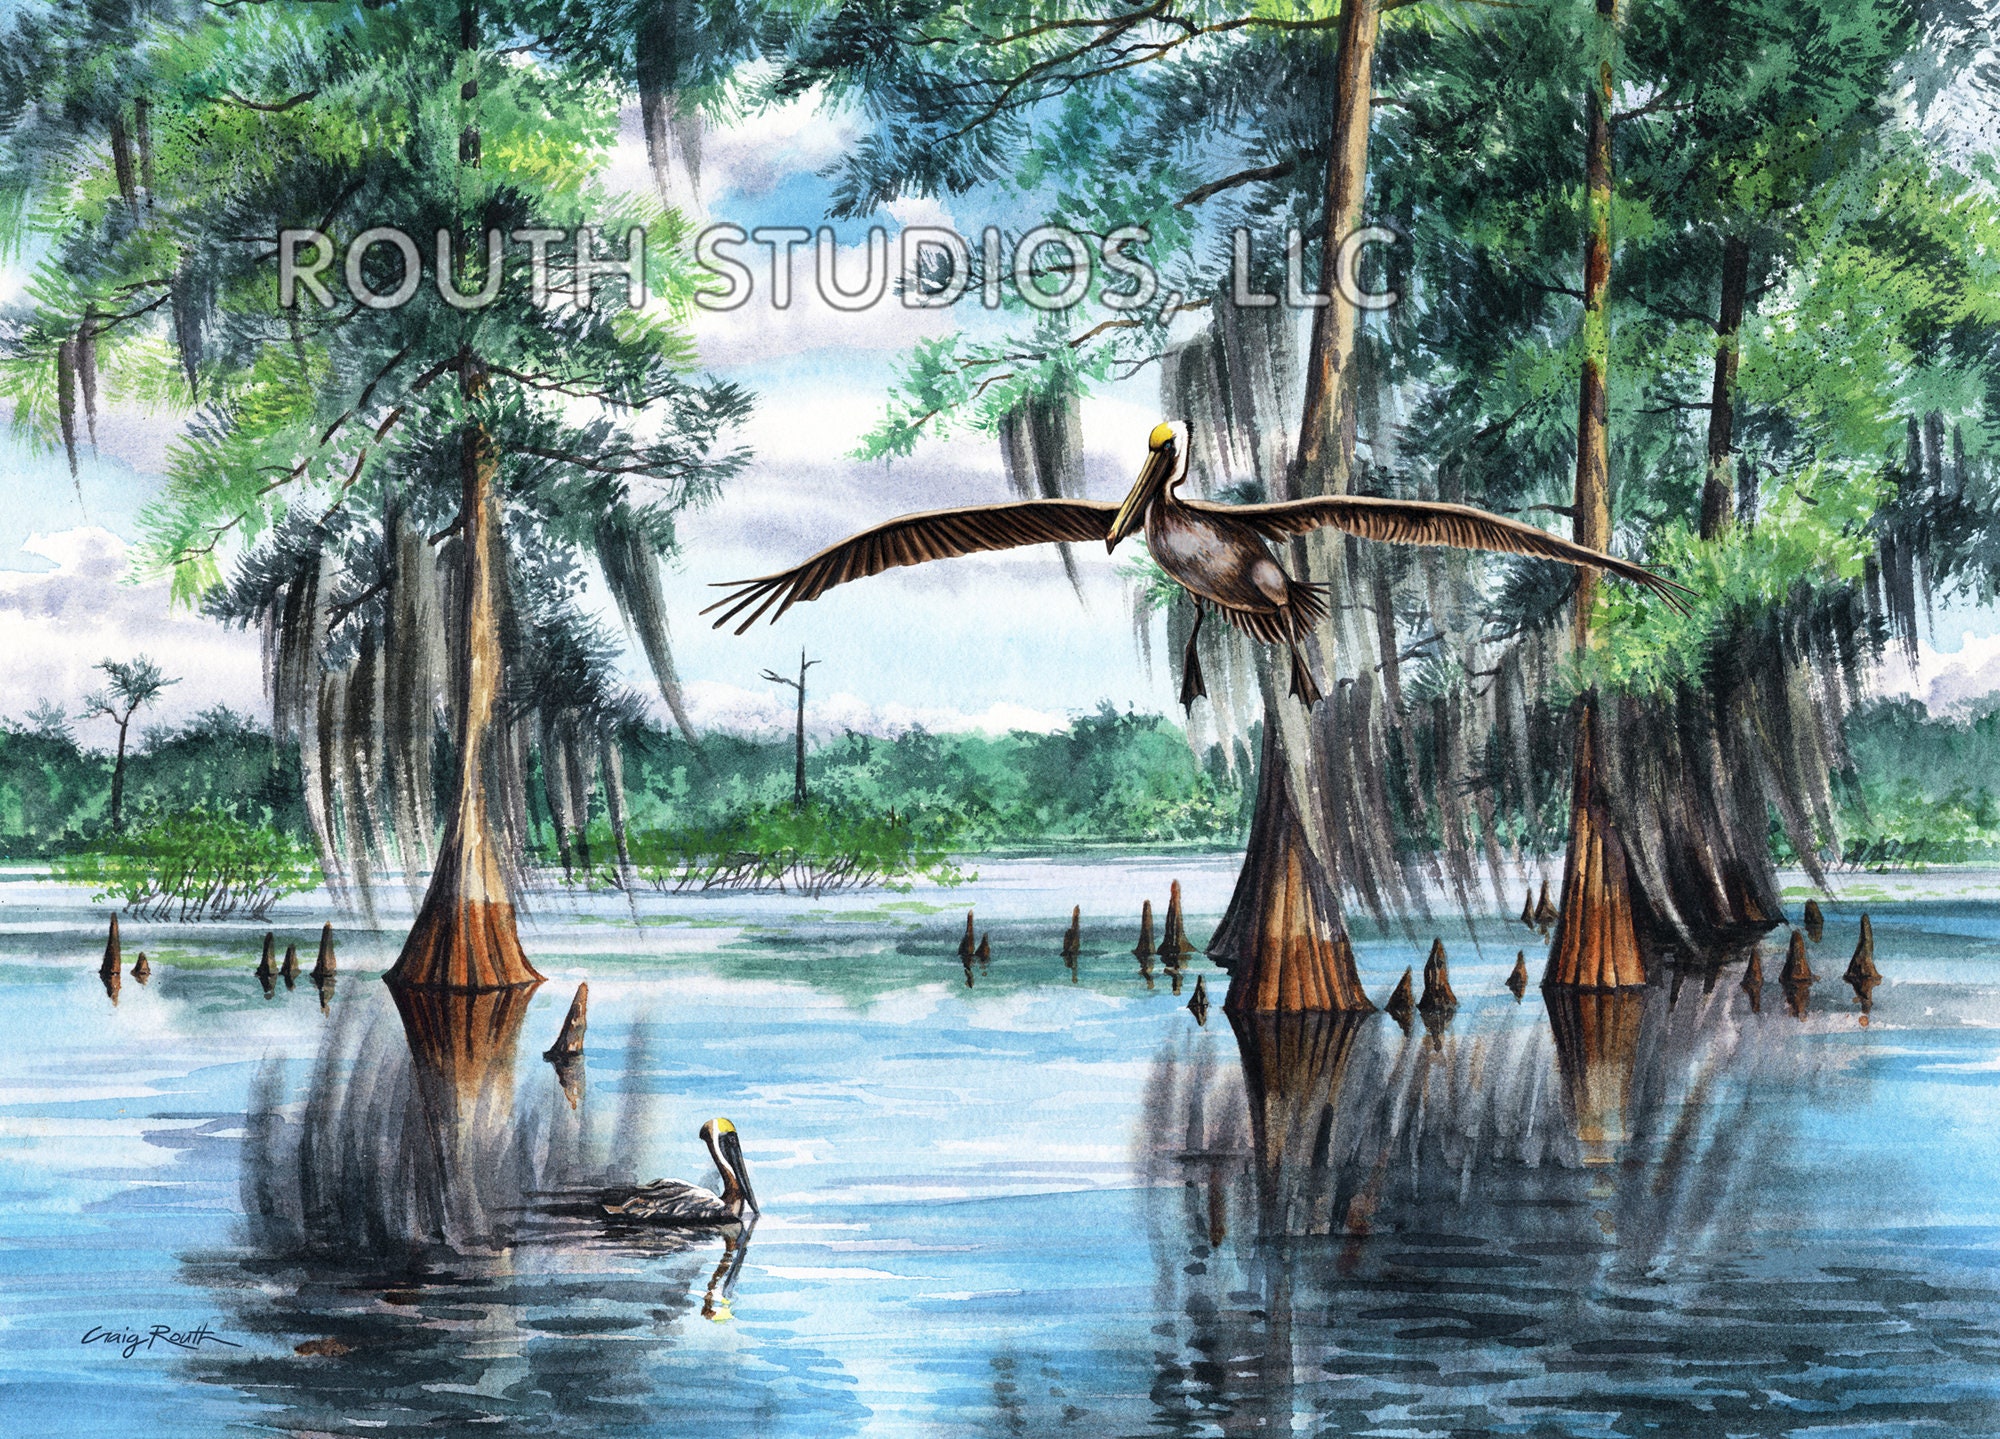 Louisiana Art Print, Swamp Scene, Brown Pelicans at Cypress Flats. Cypress  Wood Frame Available. 